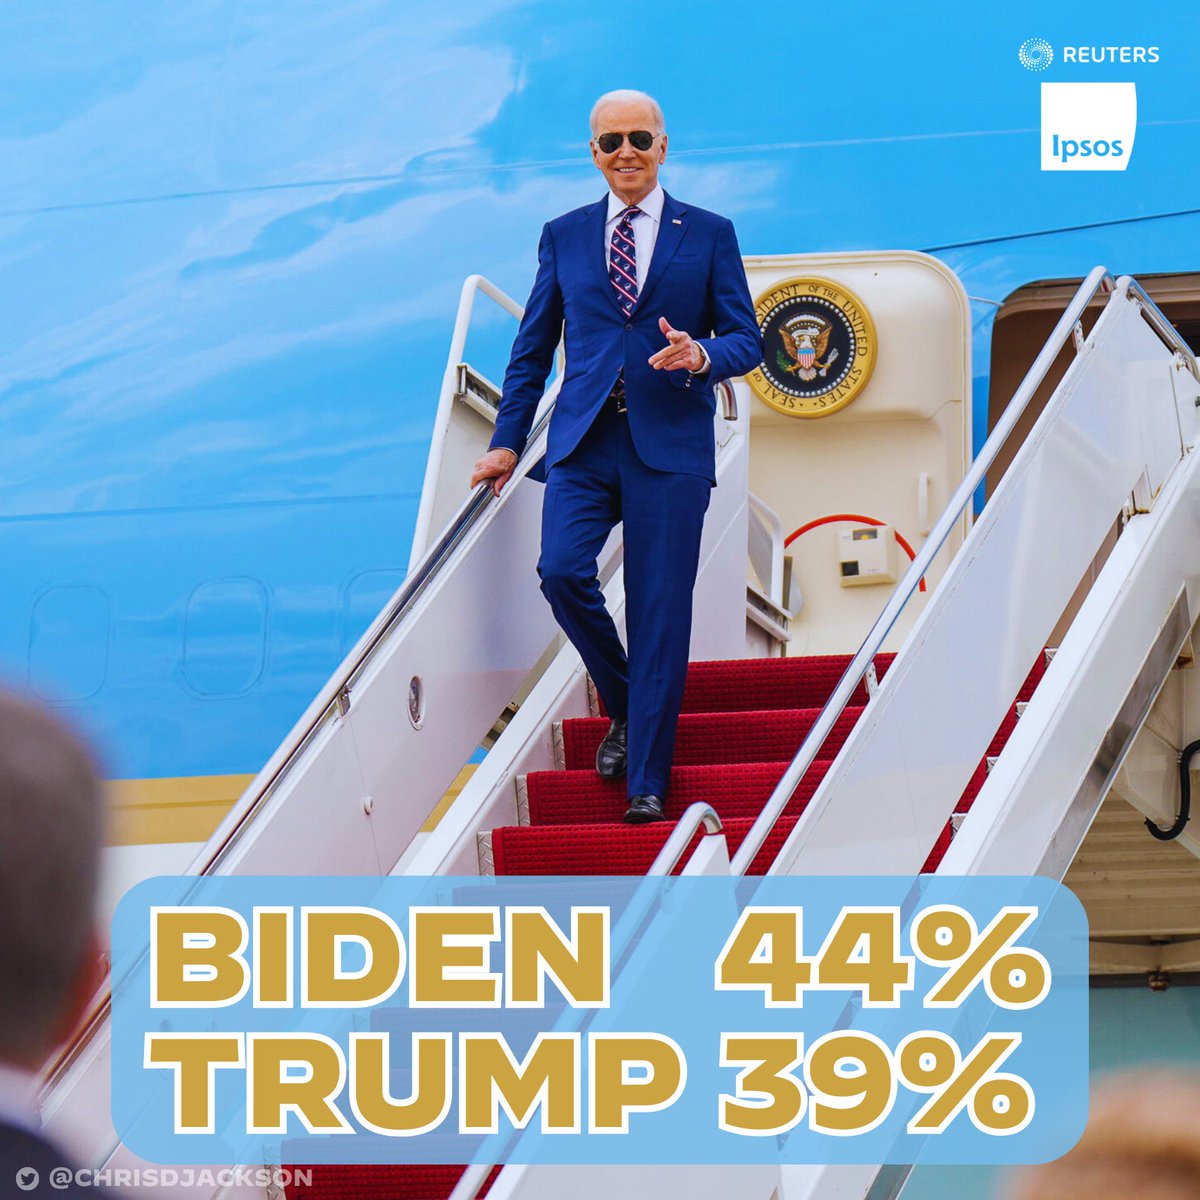 🚨 BREAKING A newly released poll from Reuters/Ipsos today shows President Biden leading Donald Trump by 5 pts, 44% to 39%. The media always like to run with polls that aren't favorable to the president. To be fair, they should cover this one with just as much fervor! But again,…